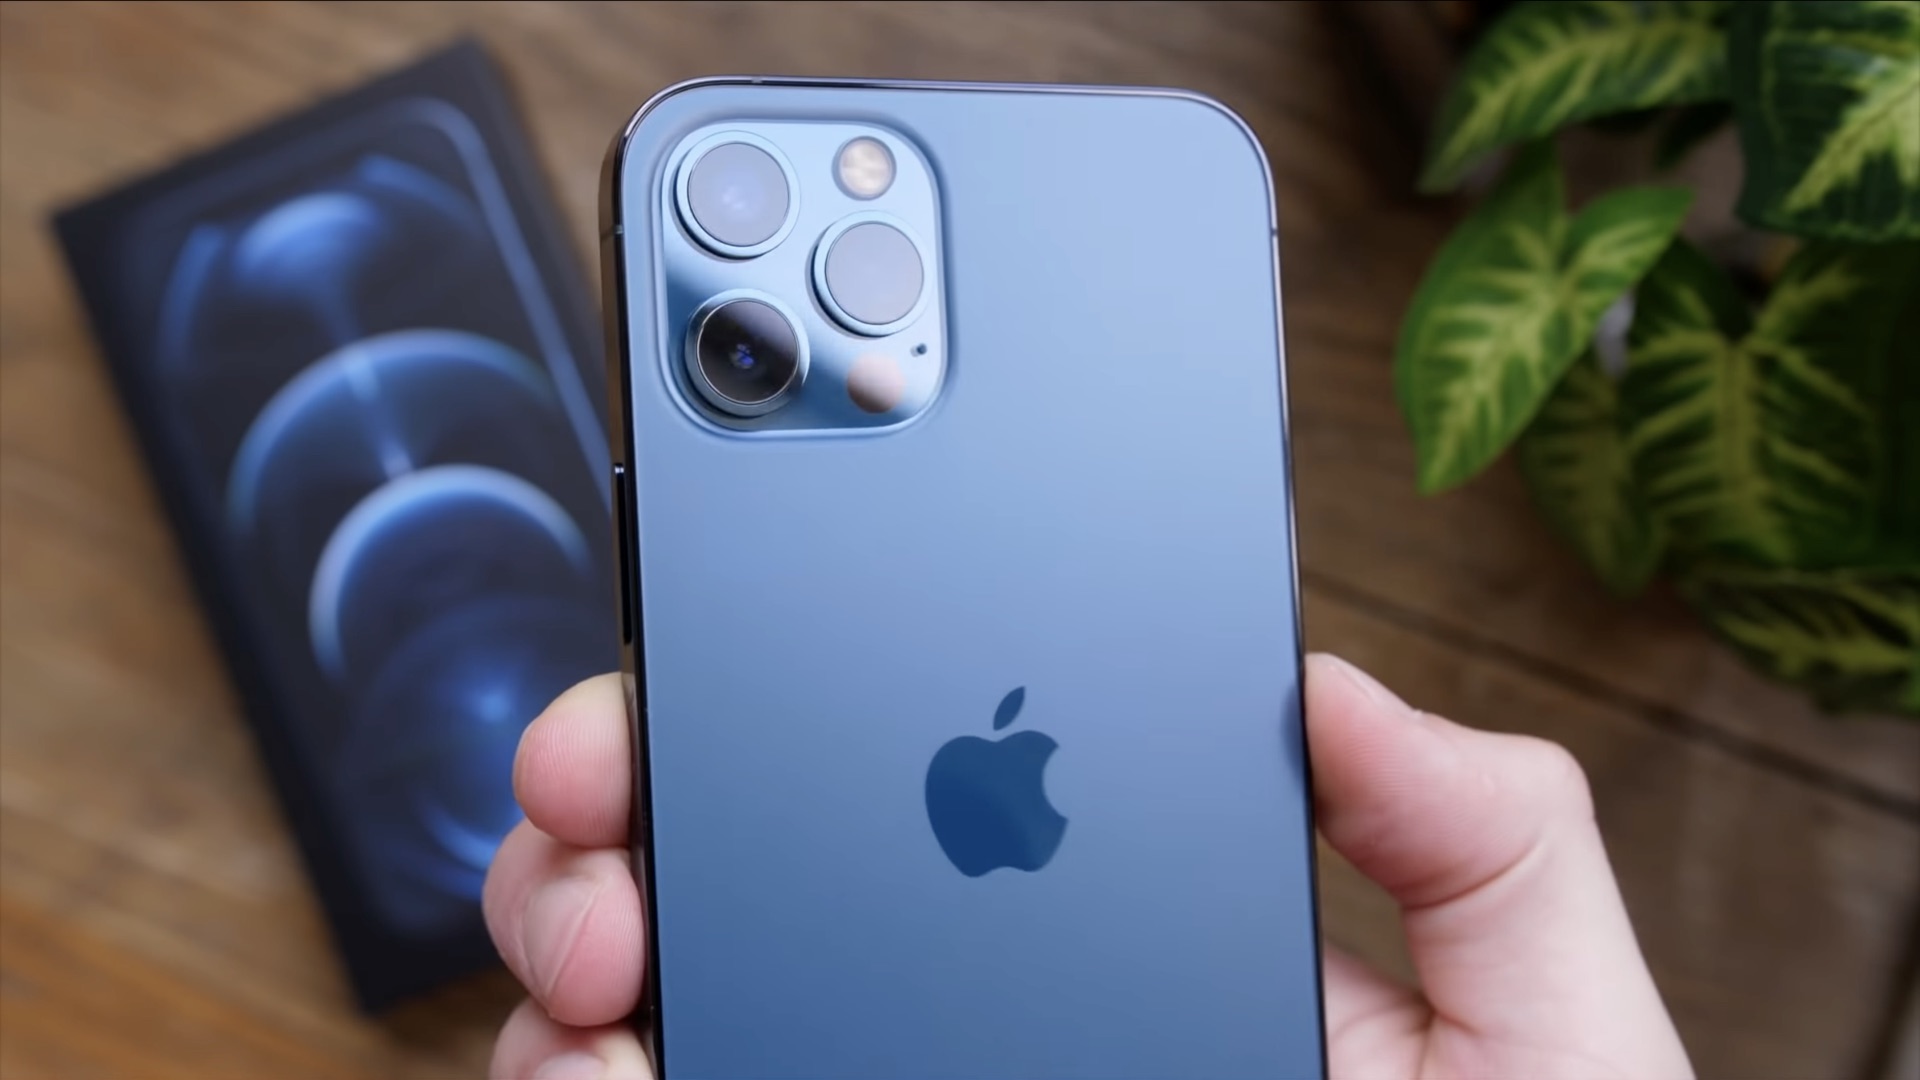 A hand holding an iPhone 12 Pro Max with the rear camera array shown